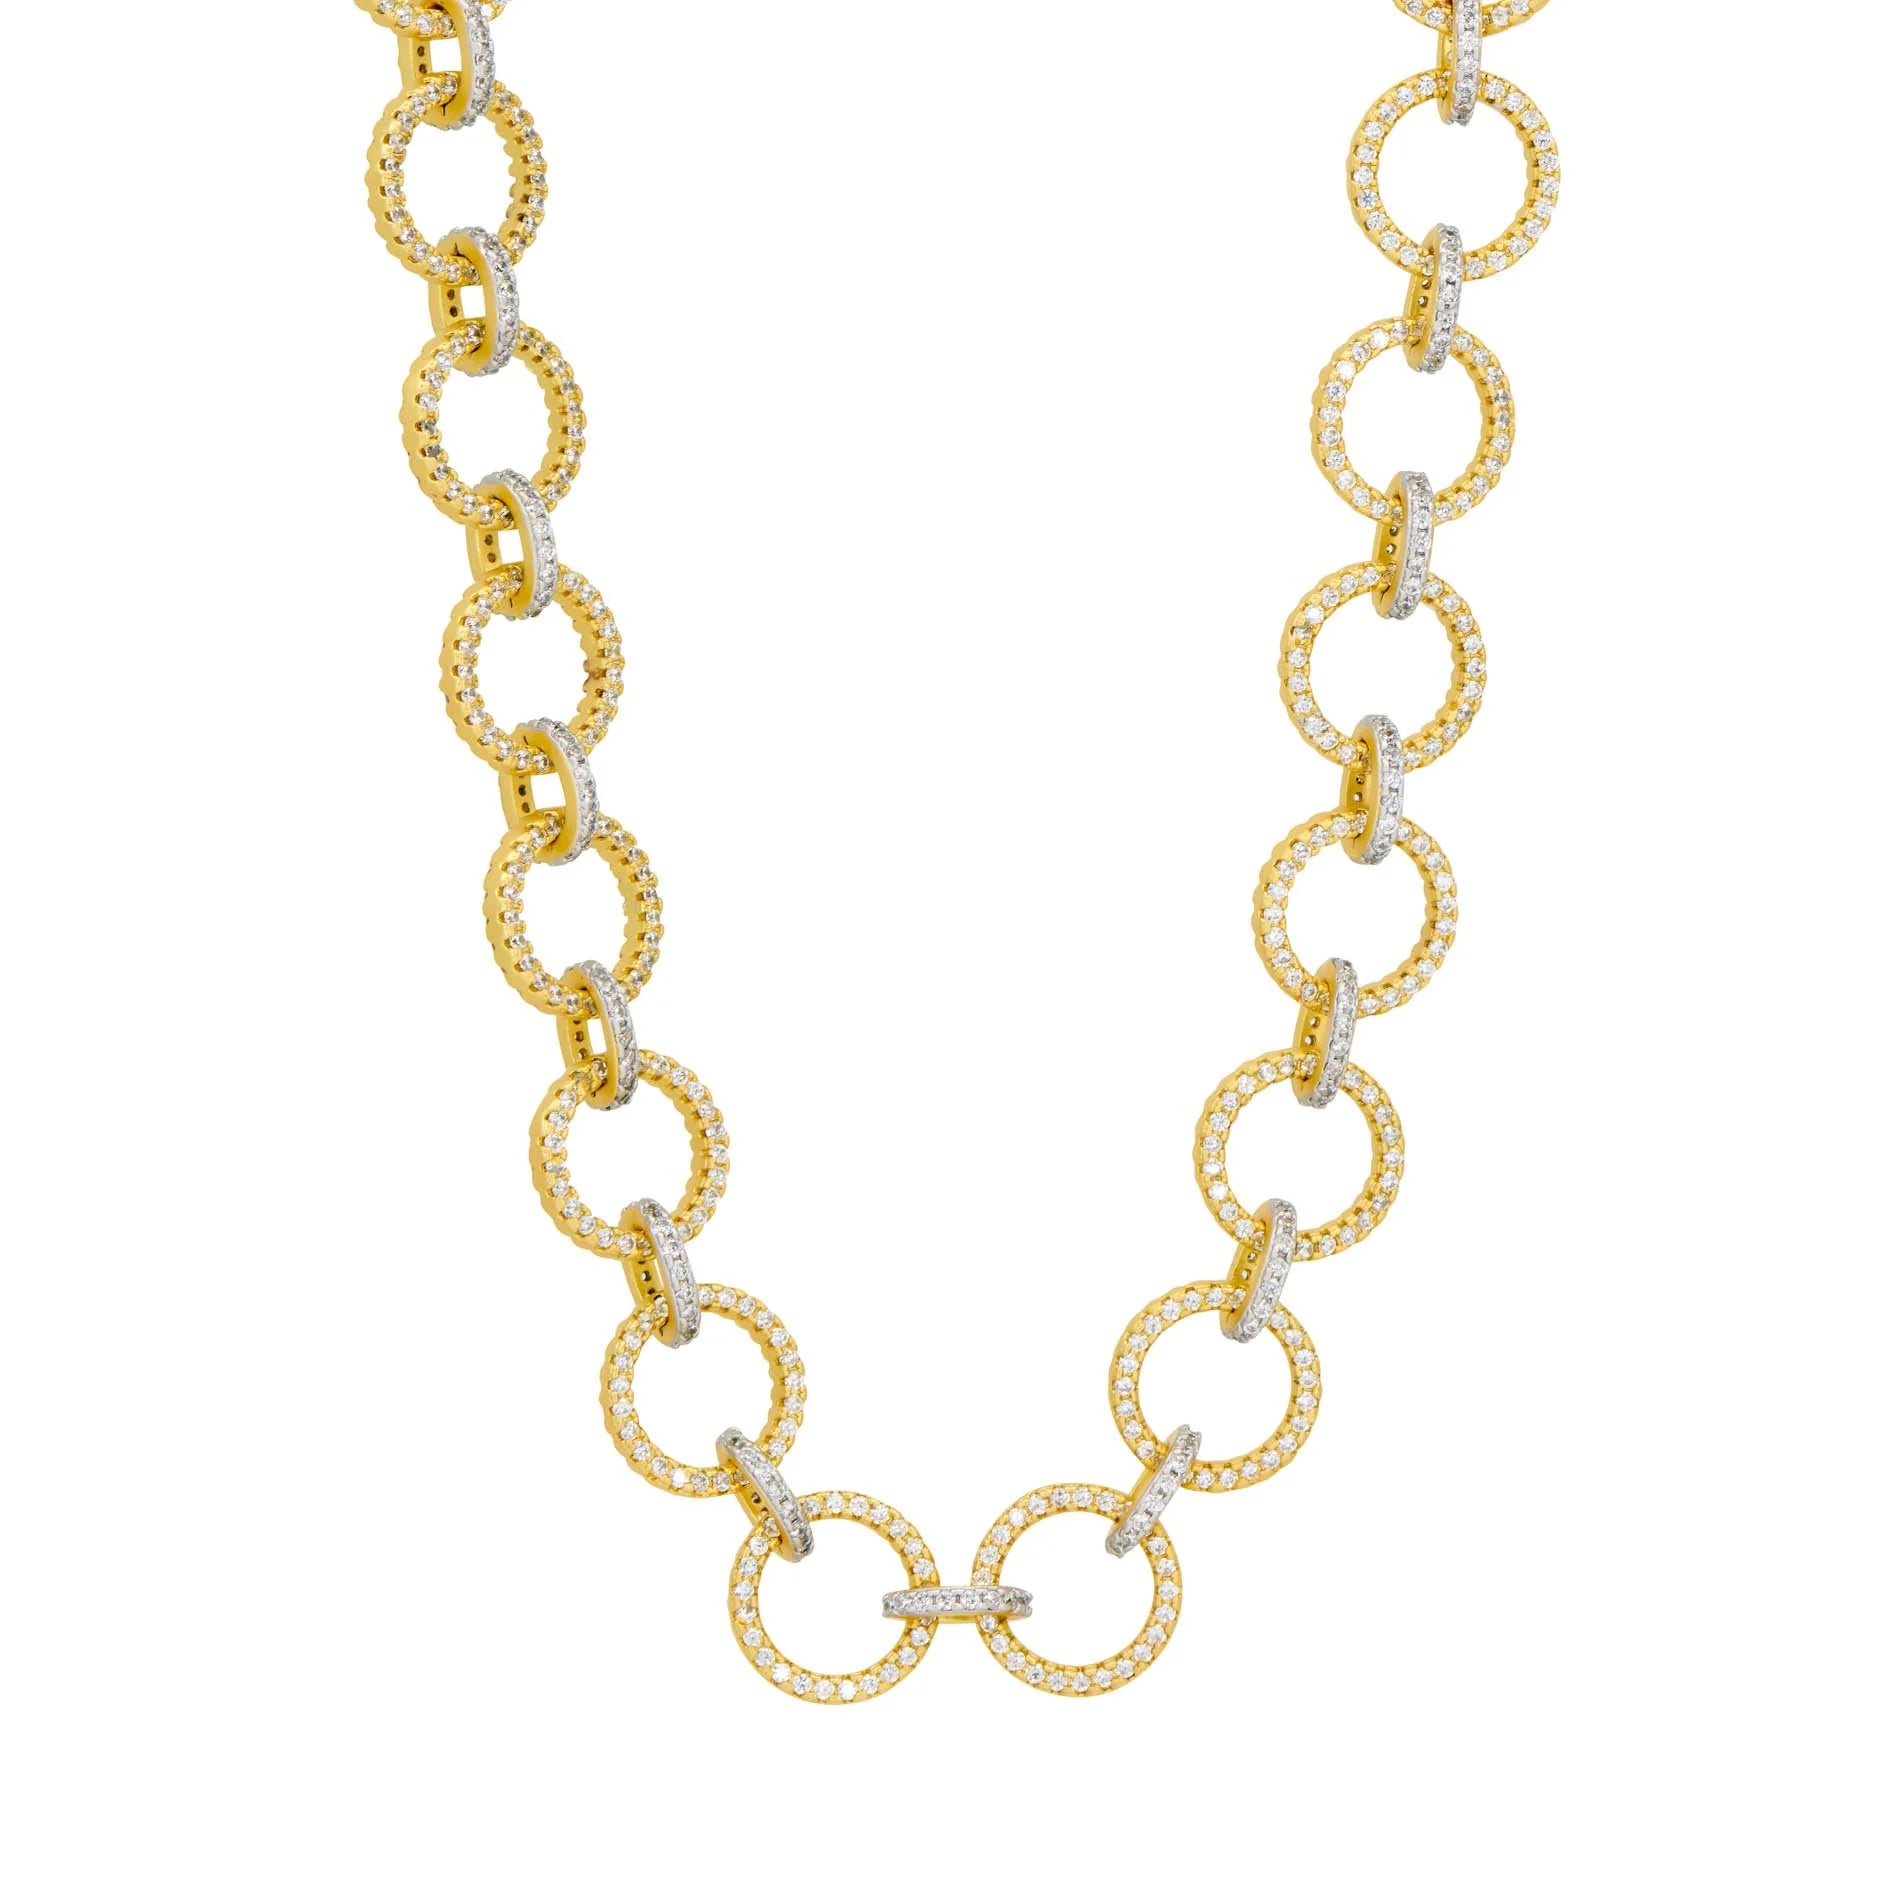 Freida Rothman "Chains Of Armor Link Necklace"